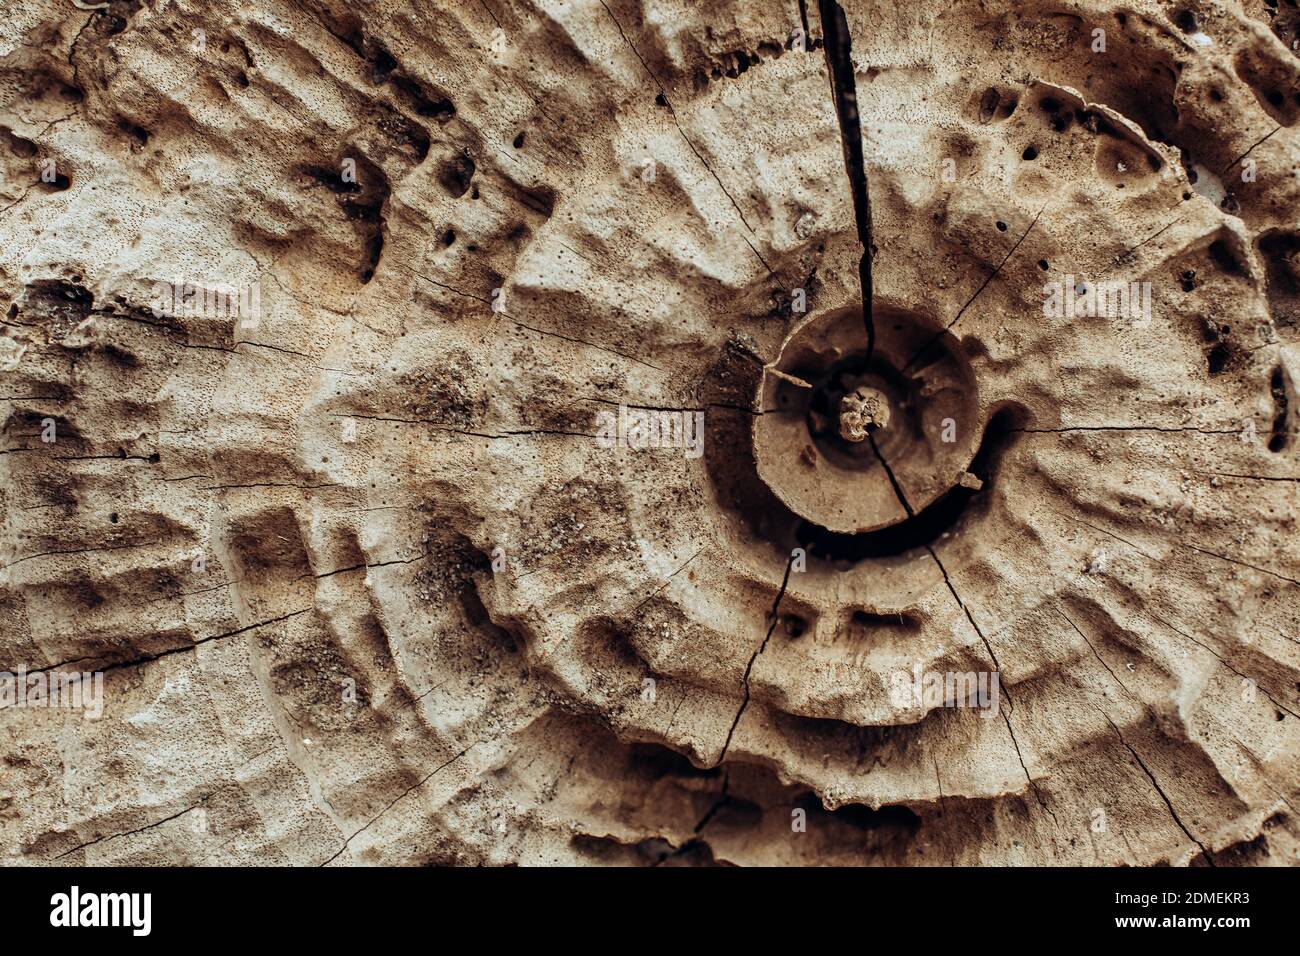 Stump of tree felled - section of the oak trunk with annual rings. Slice wood. Stock Photo